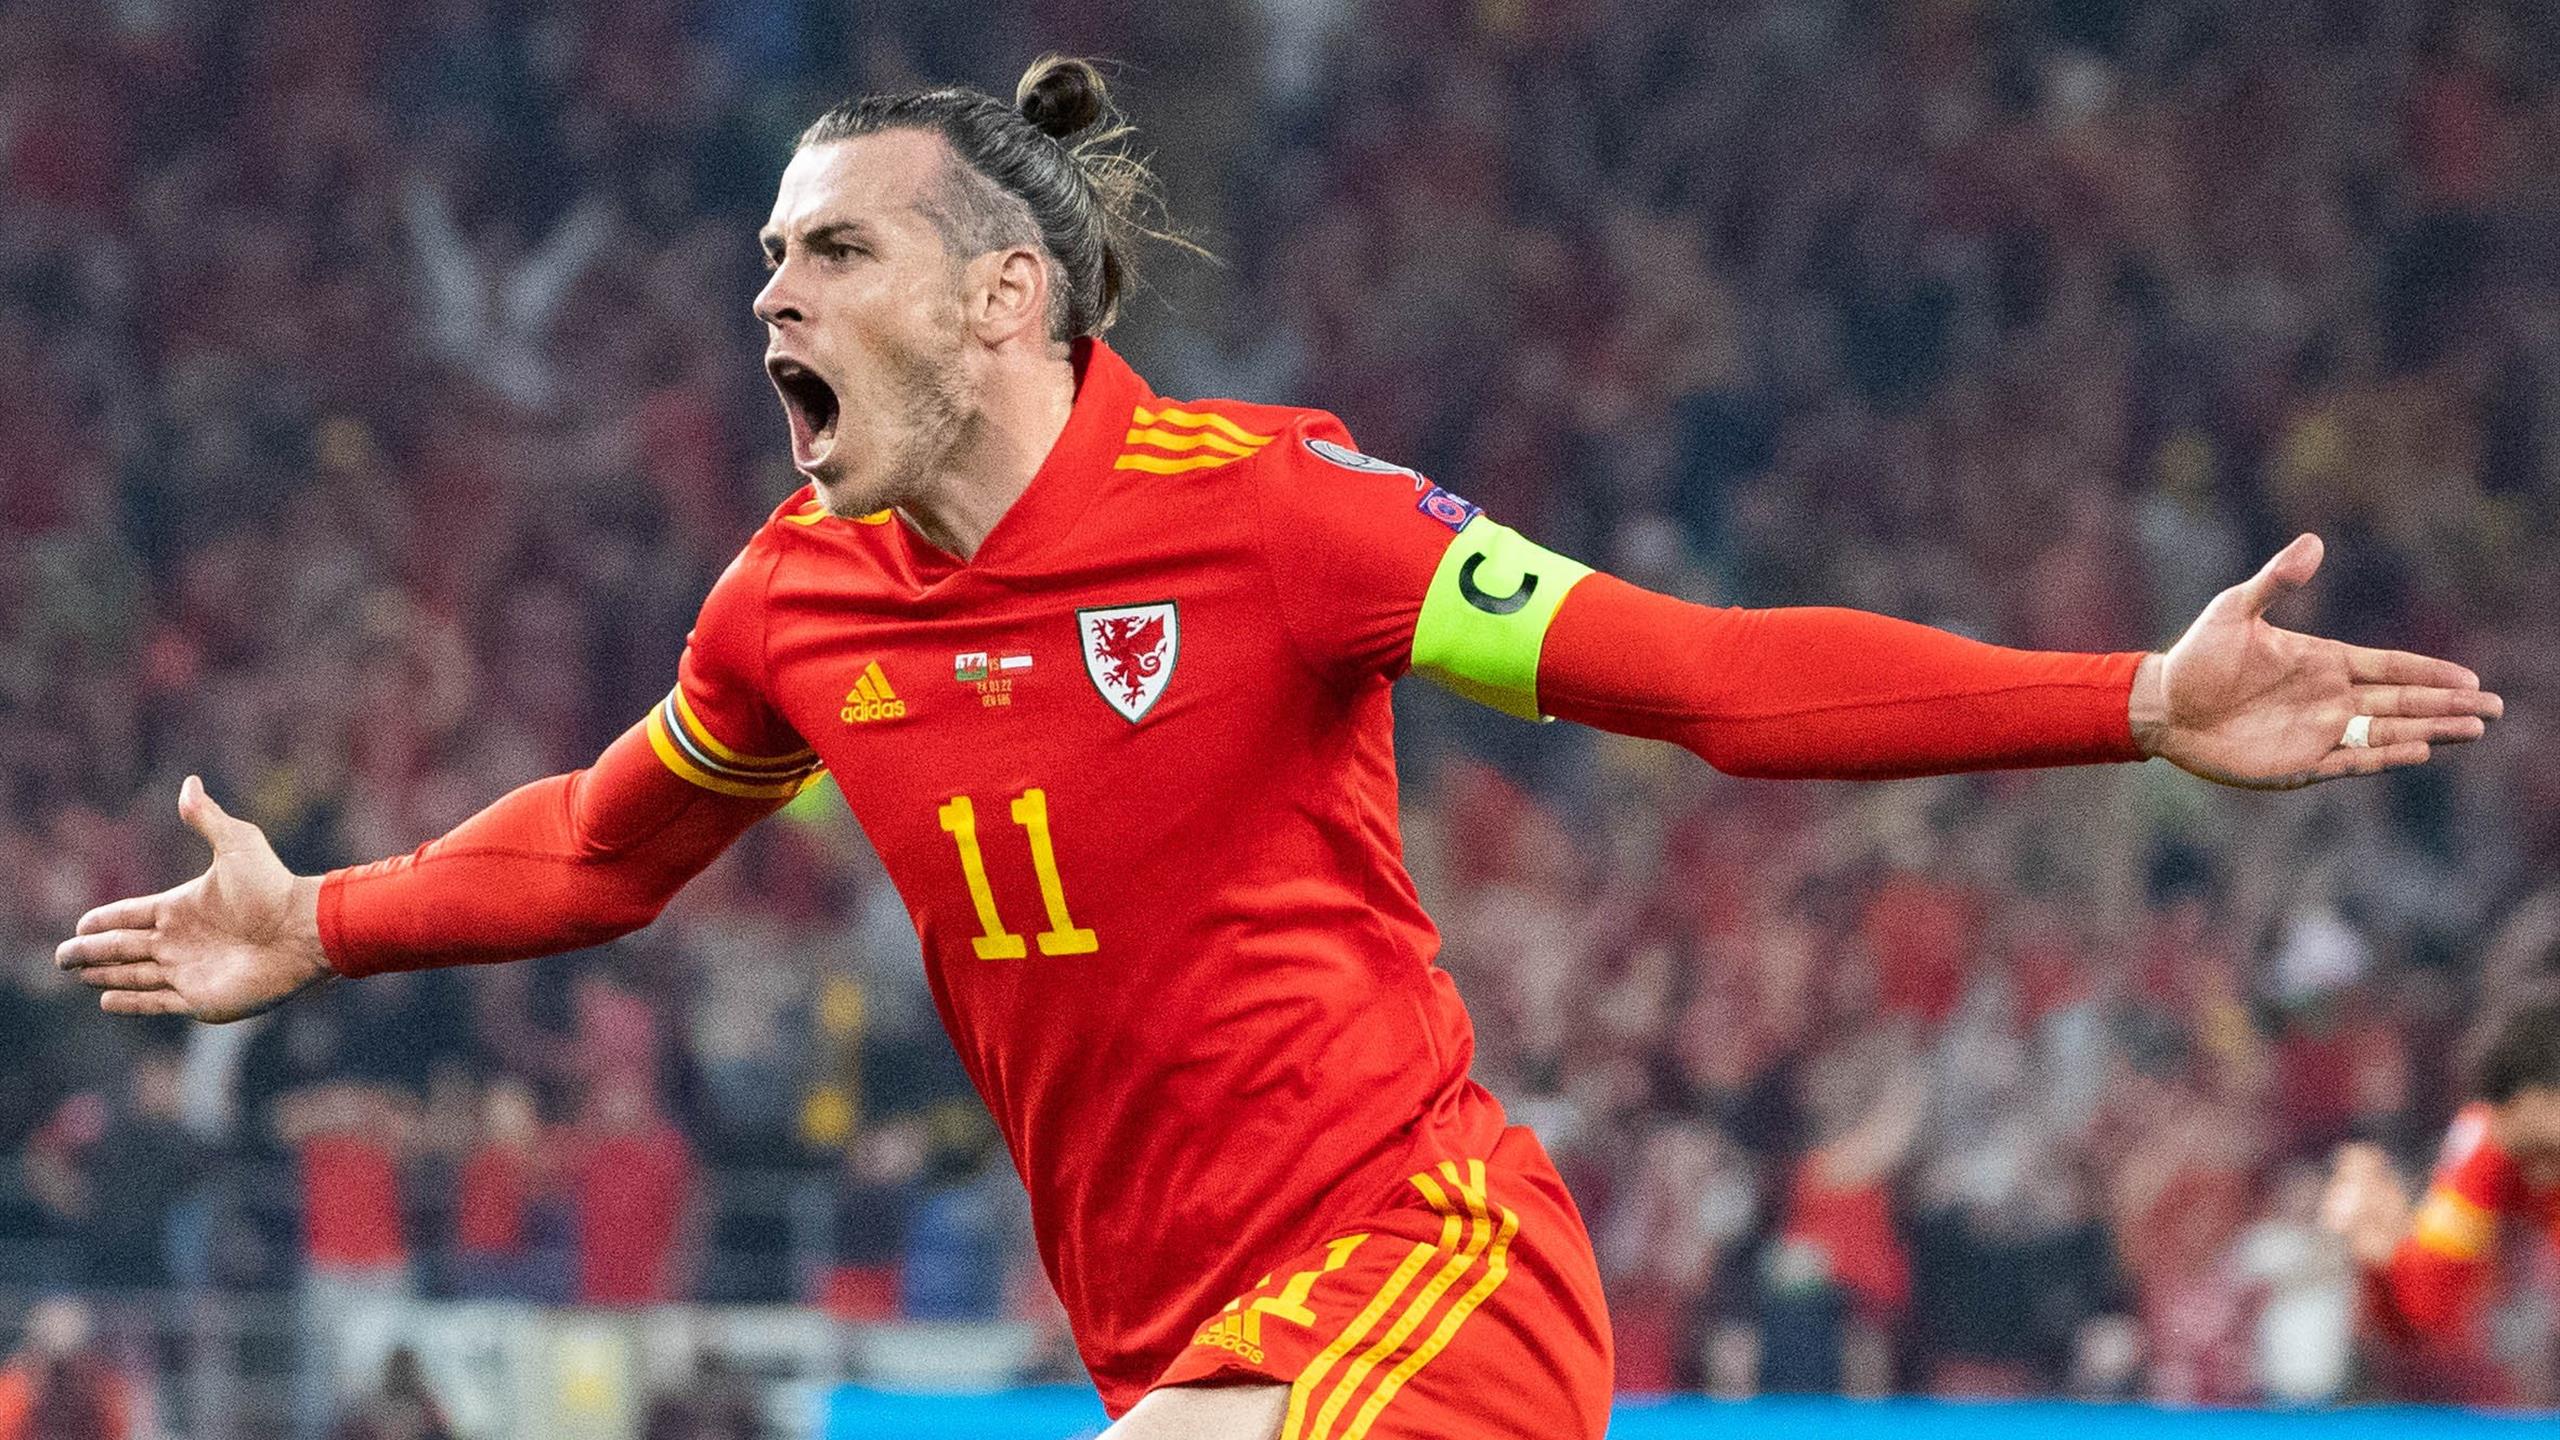 World Cup Play-Off Final 2022: Gareth Bale TARGETS World Cup spot as Ukraine hope to continue fairytale journey, Follow Wales vs Ukraine Live Streaming, Team News, Predictions